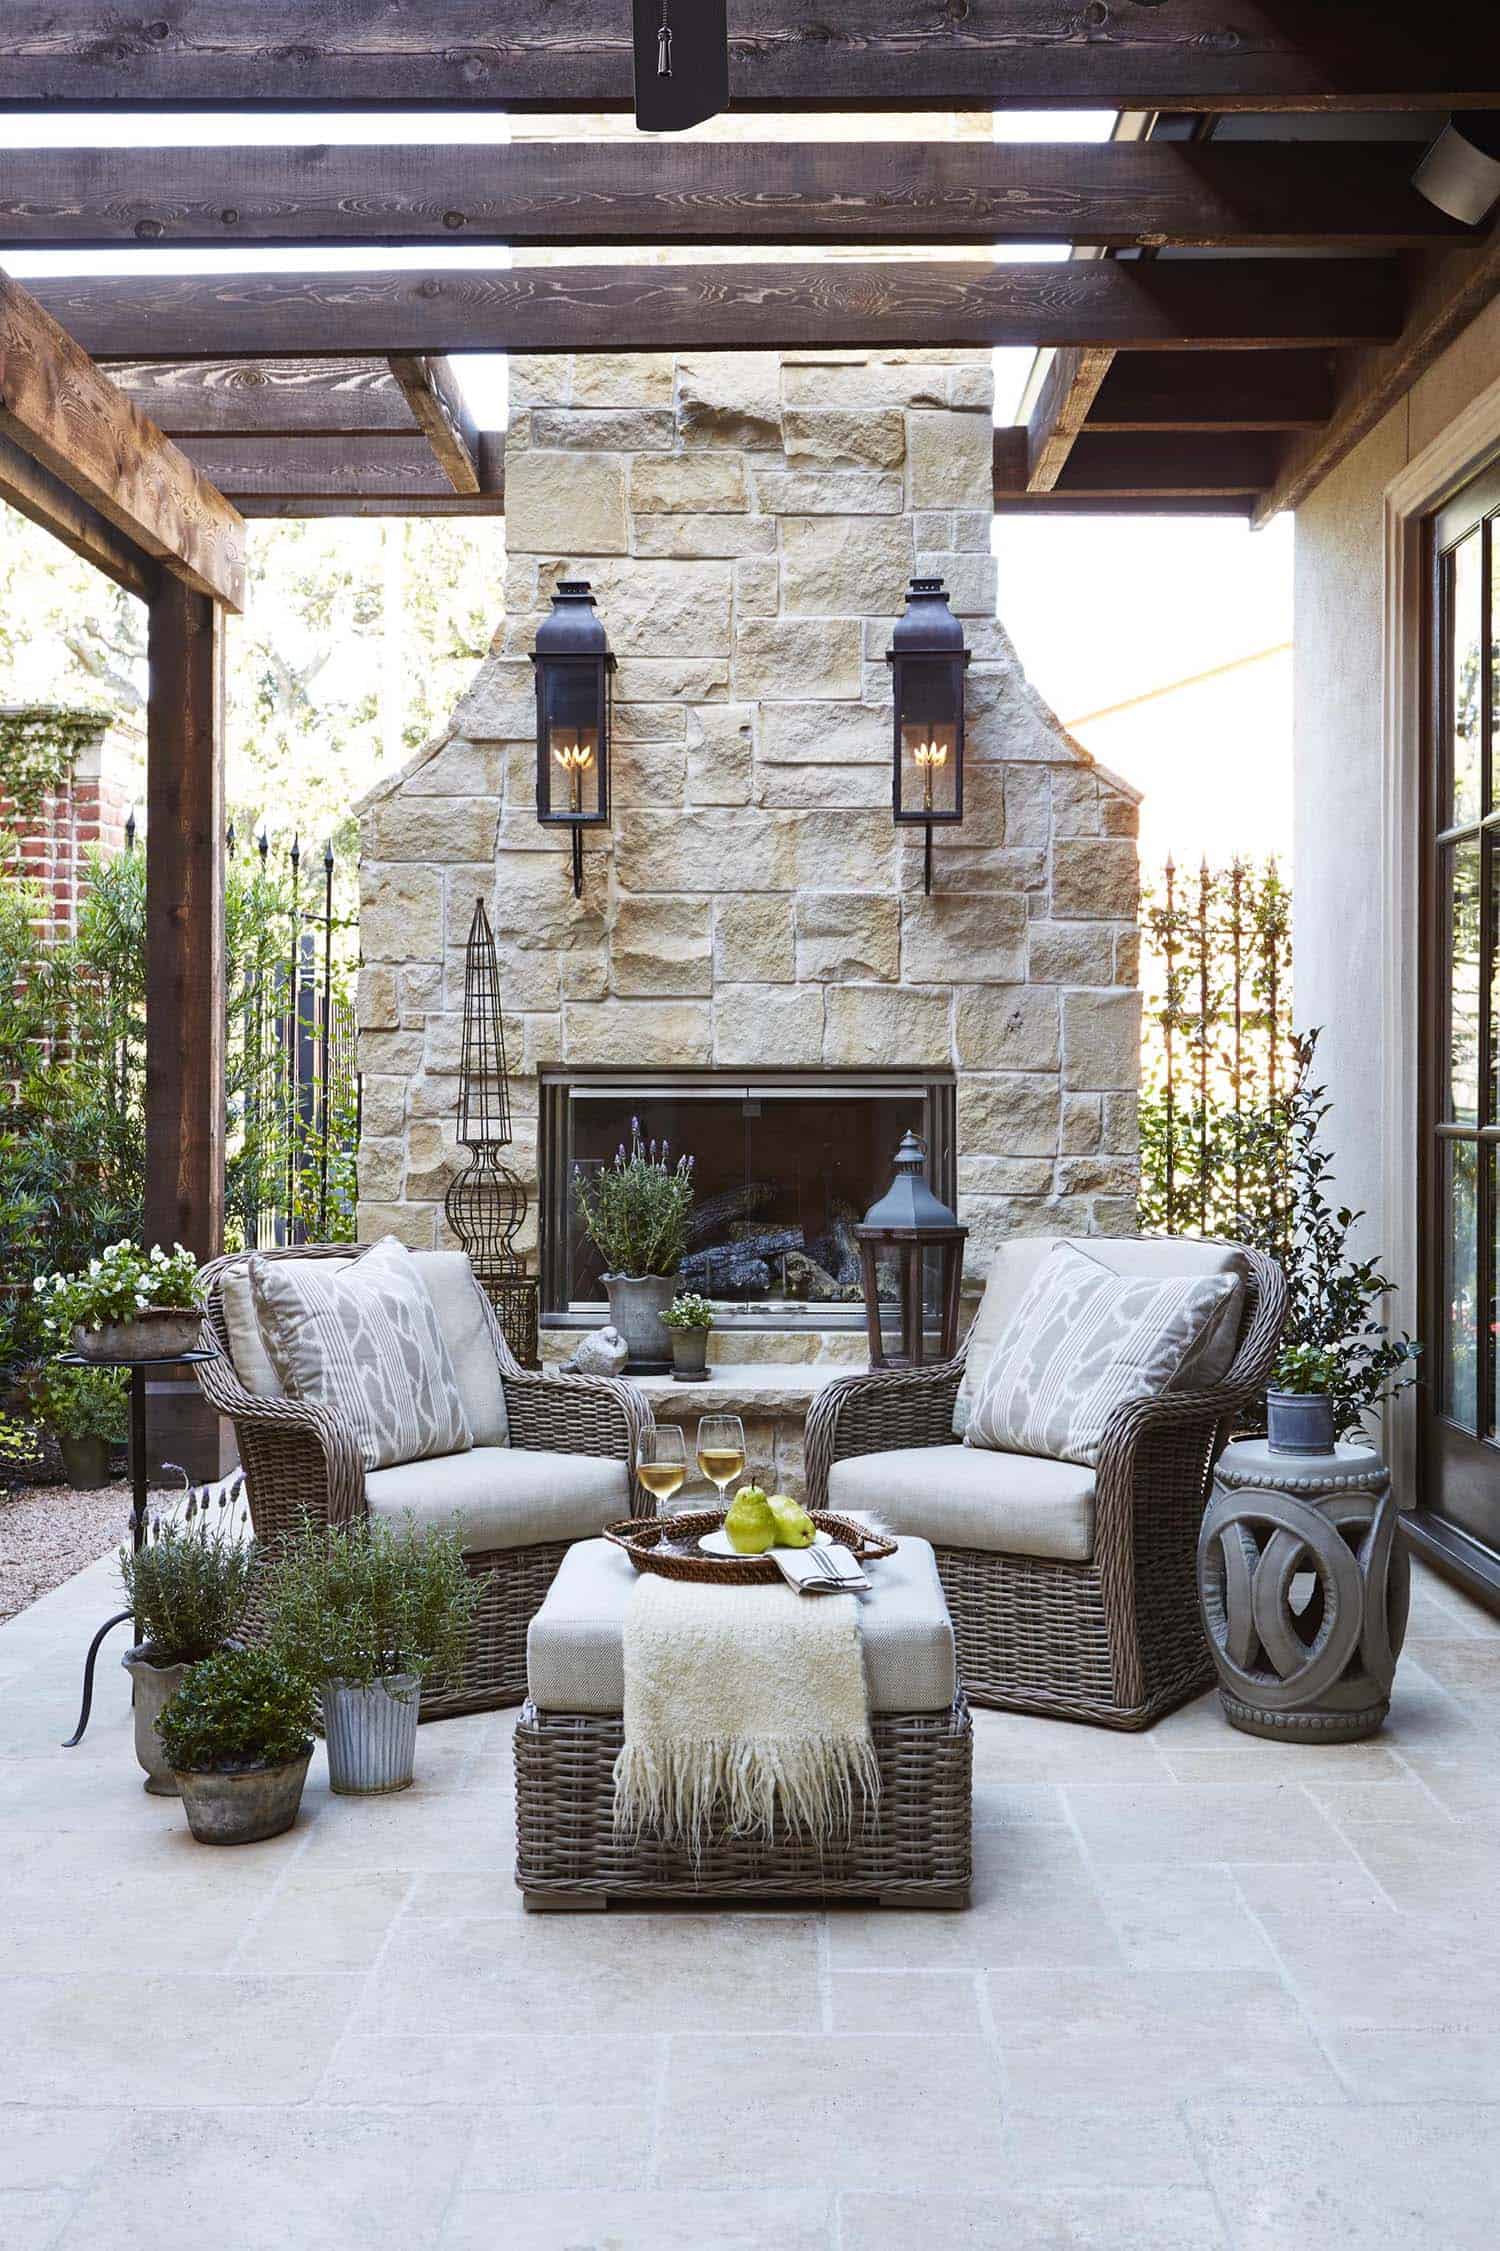 Irresistible Outdoor Fireplace Ideas, Outdoor Stone Fireplace Ideas